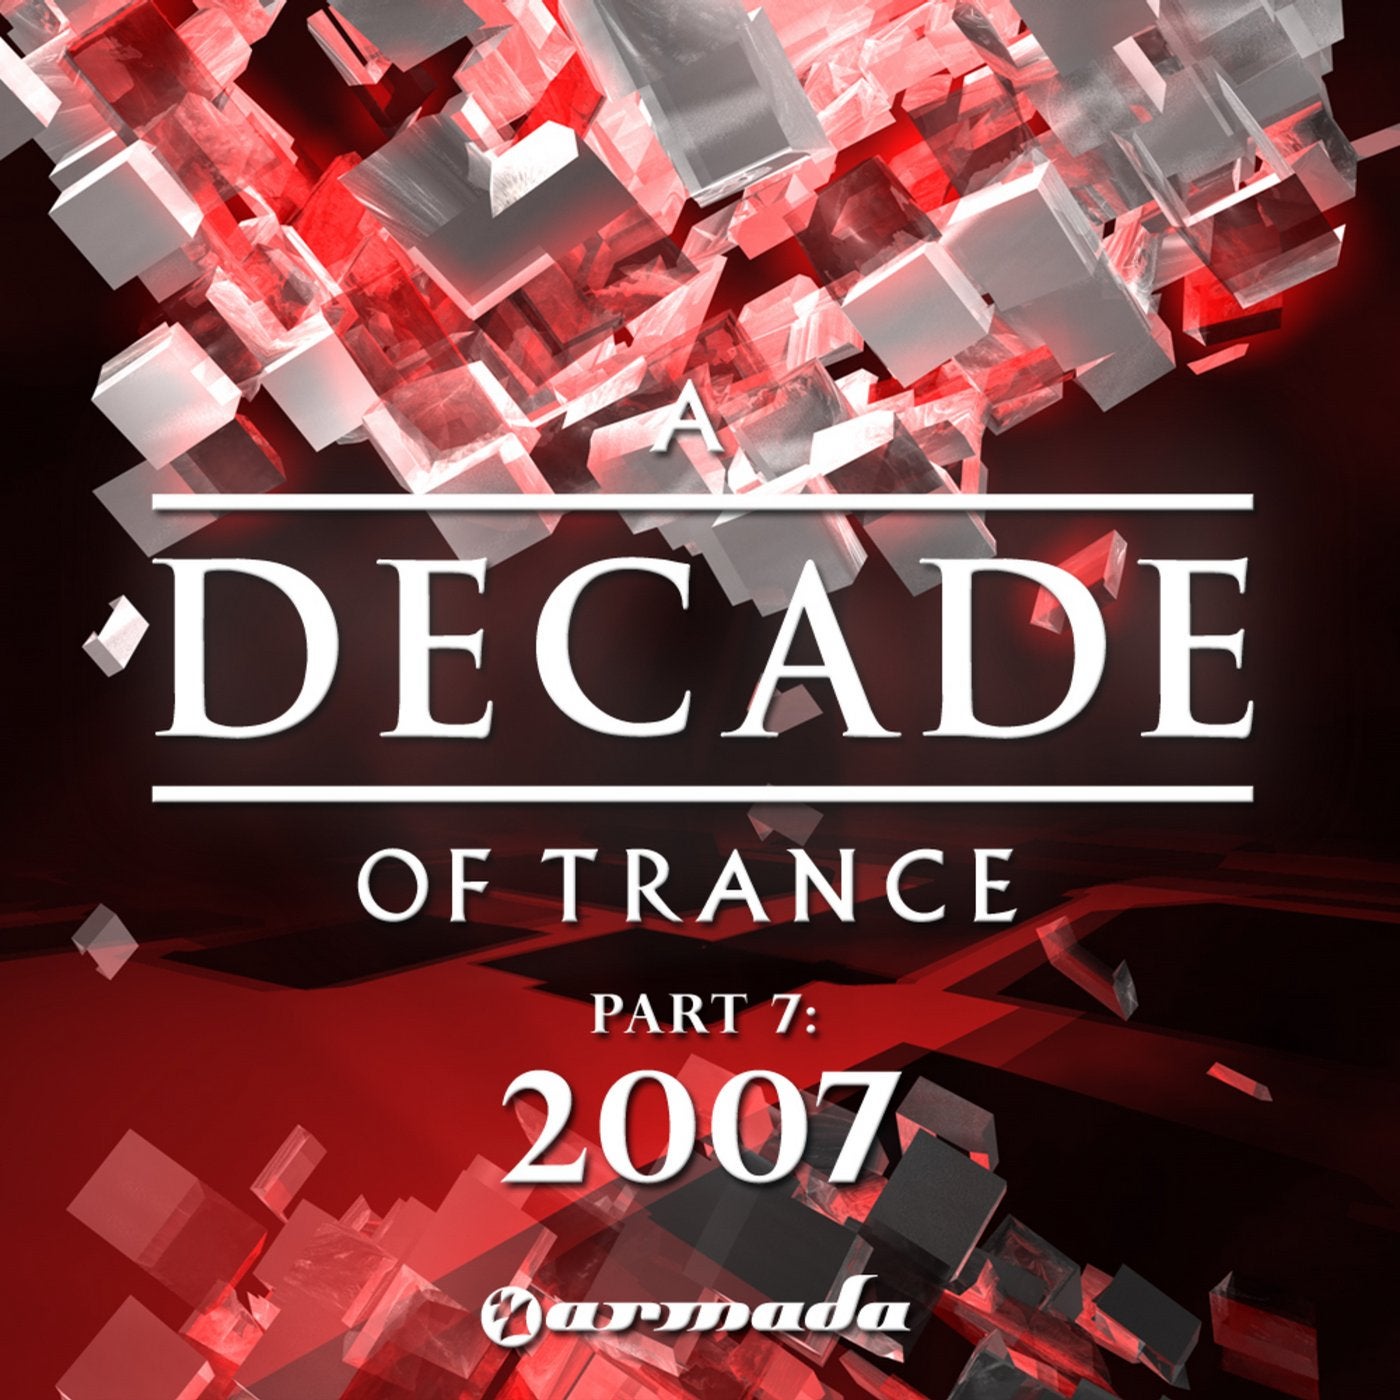 A Decade of Trance, Pt. 7 - 2007